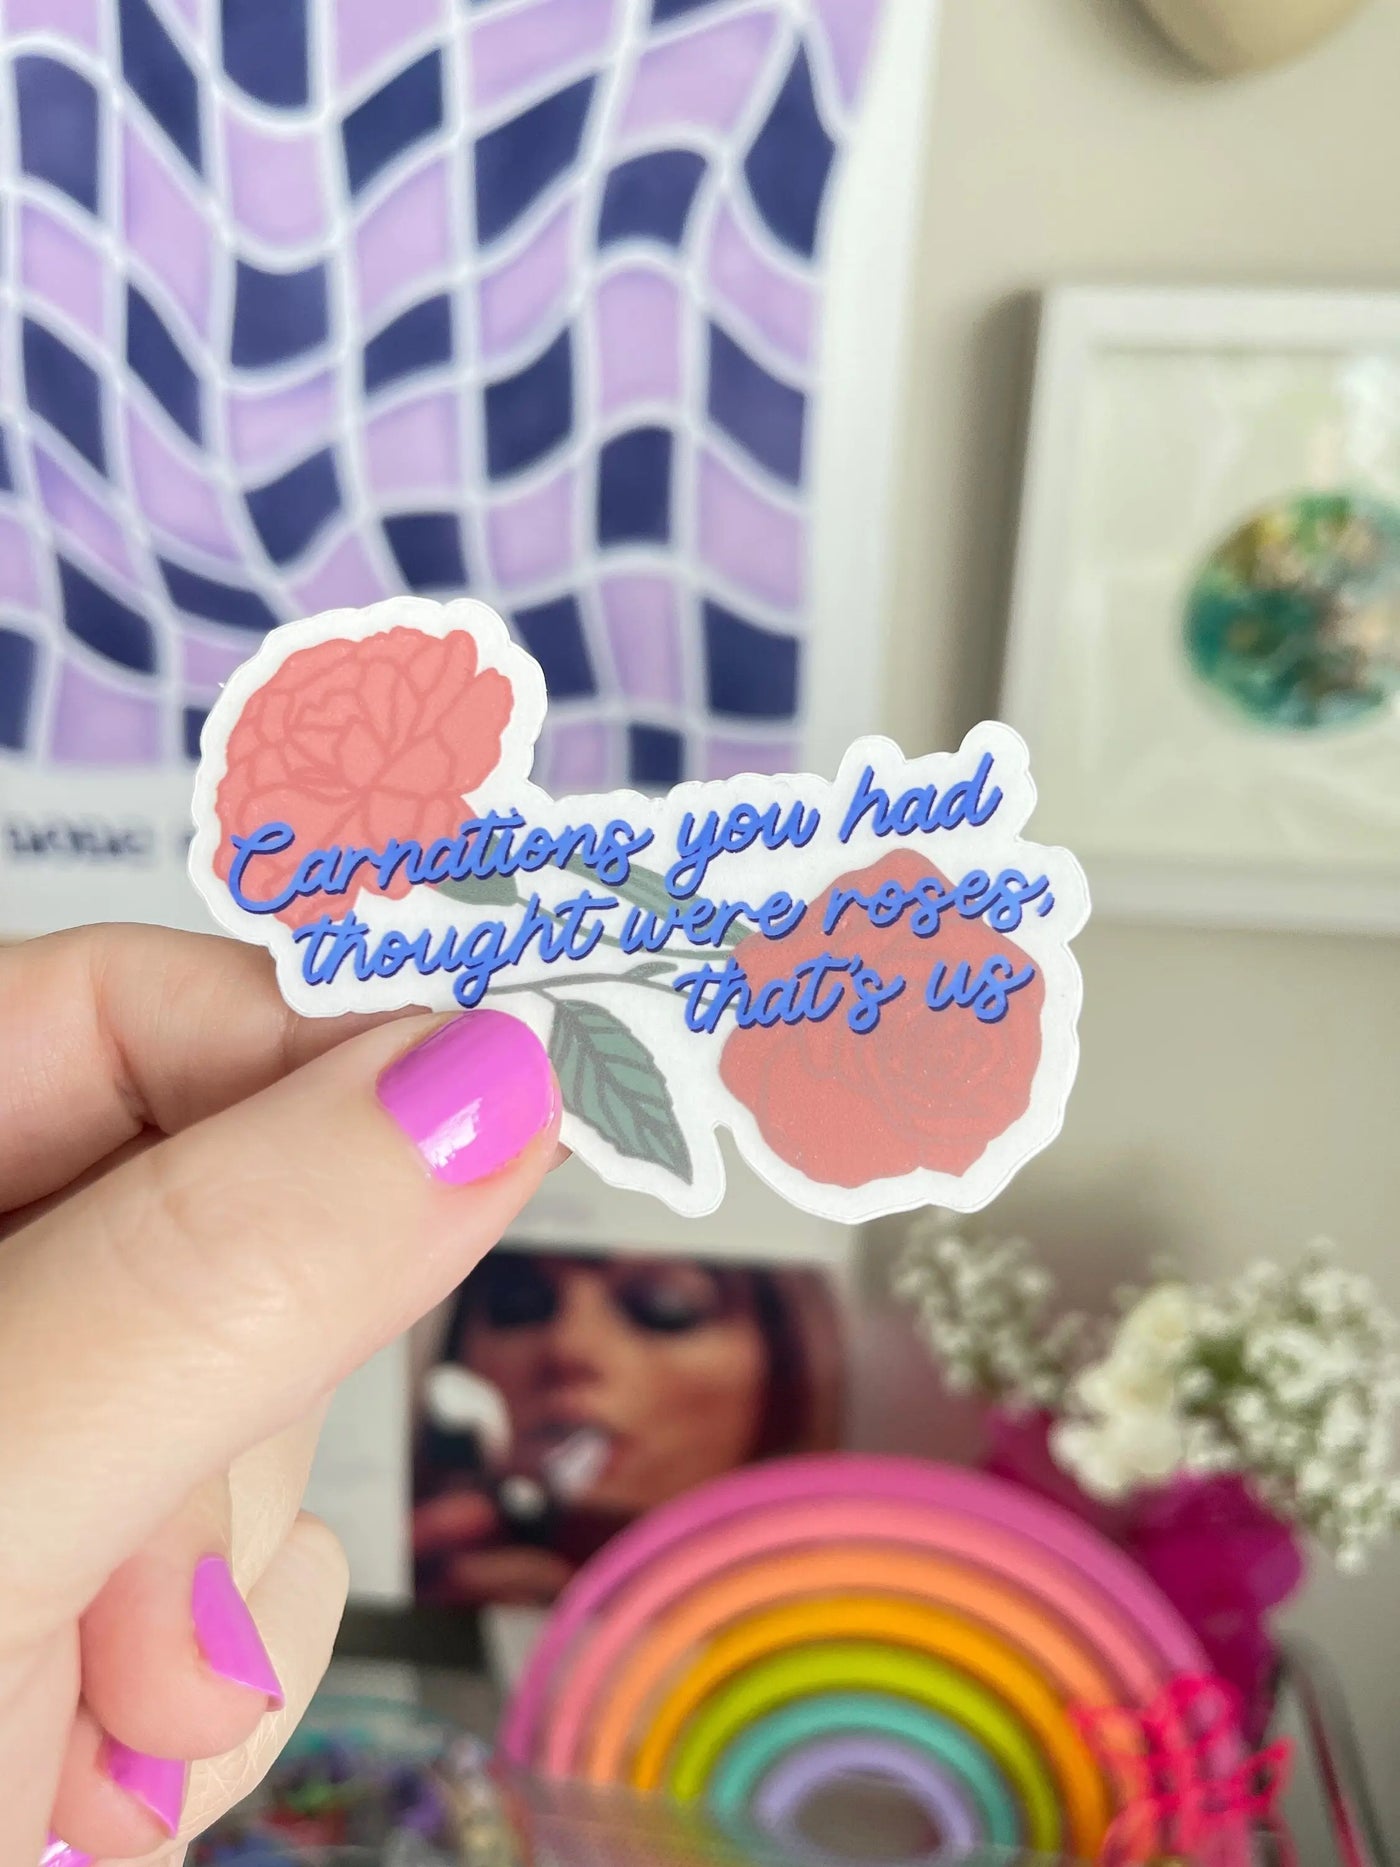 CLEAR Carnations you had thought were roses thats us sticker MangoIllustrated